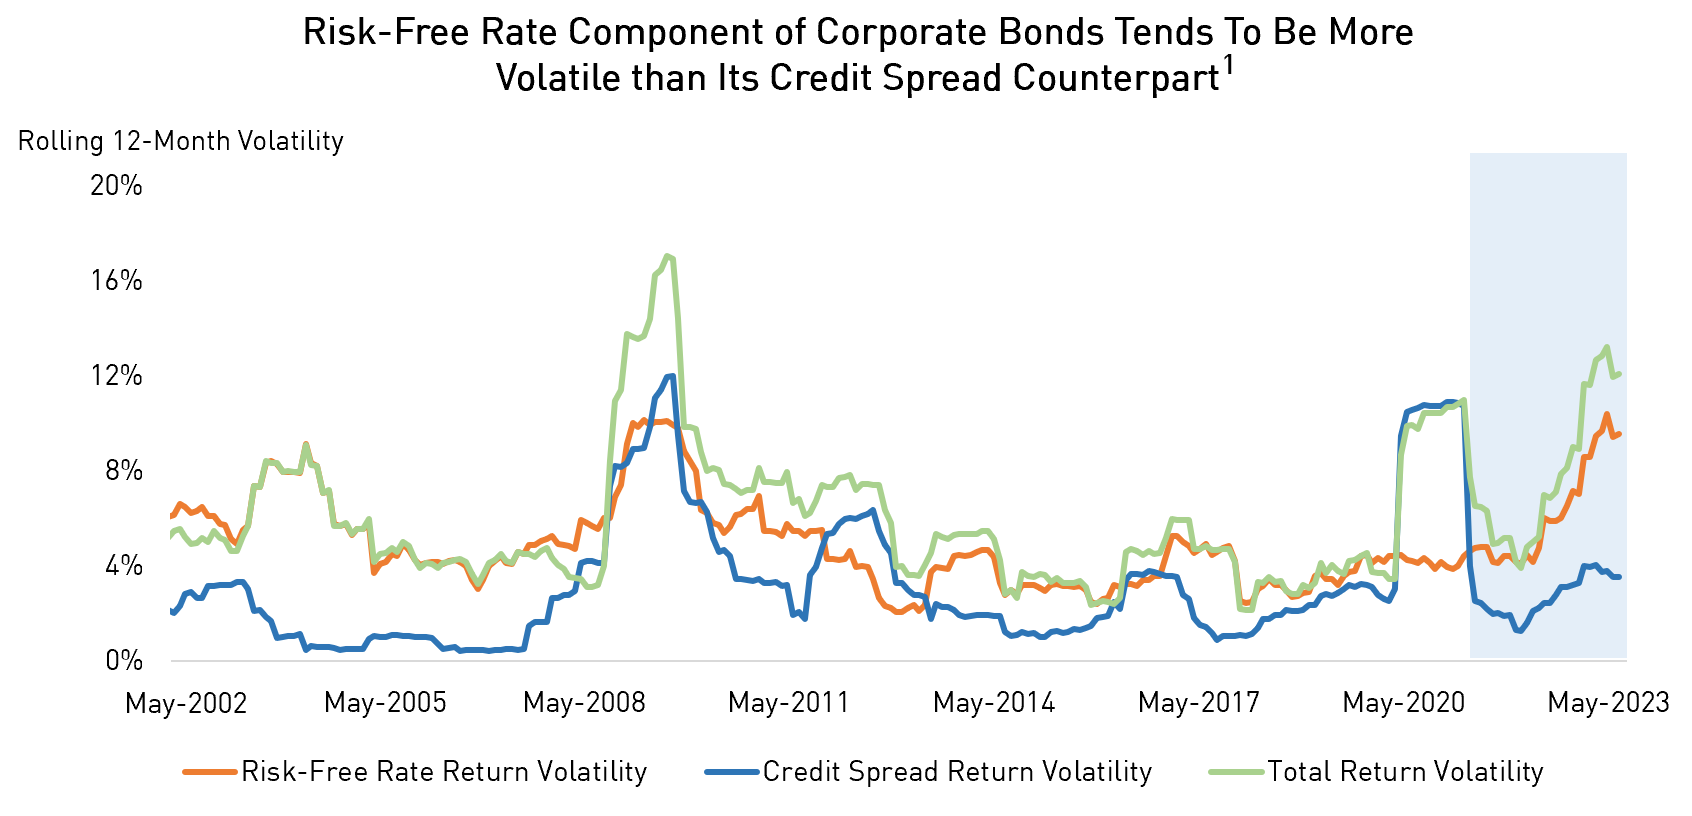 Chart showing how risk-free rate component of corporate bonds tends to be more volatile than its credit spread counterpart